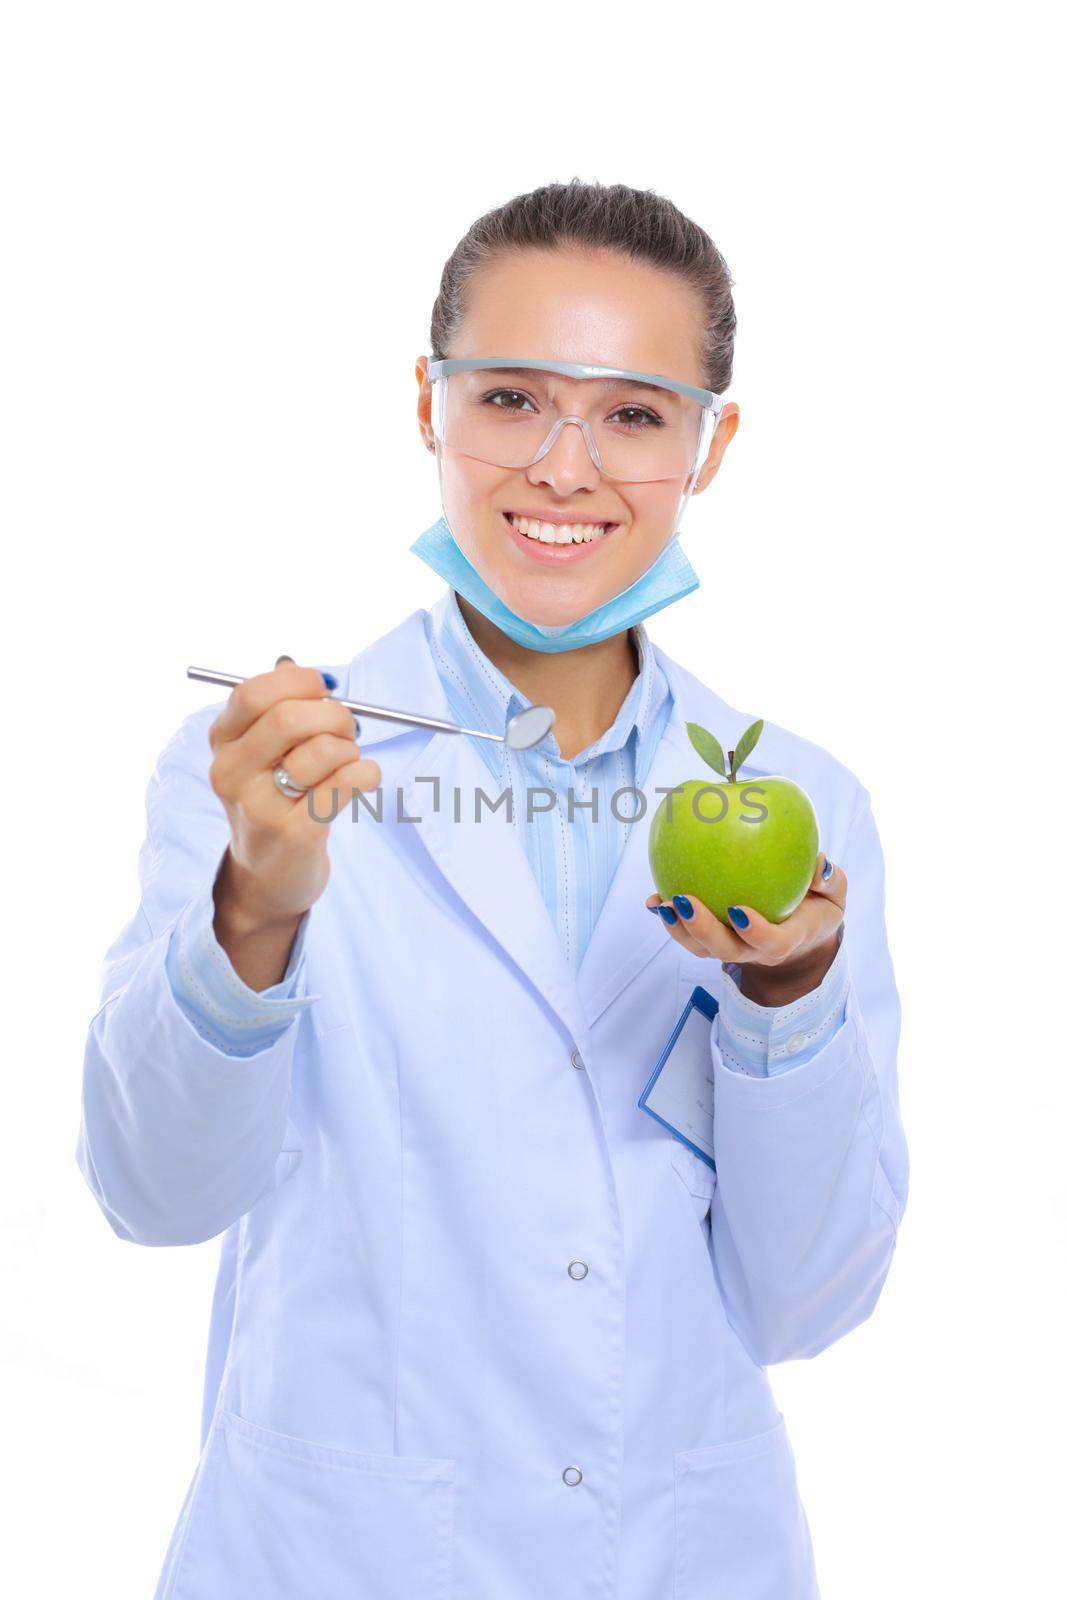 Dentist medical doctor woman hold green fresh apple in hand and tooth brush. Dentist doctors. Woman doctors.